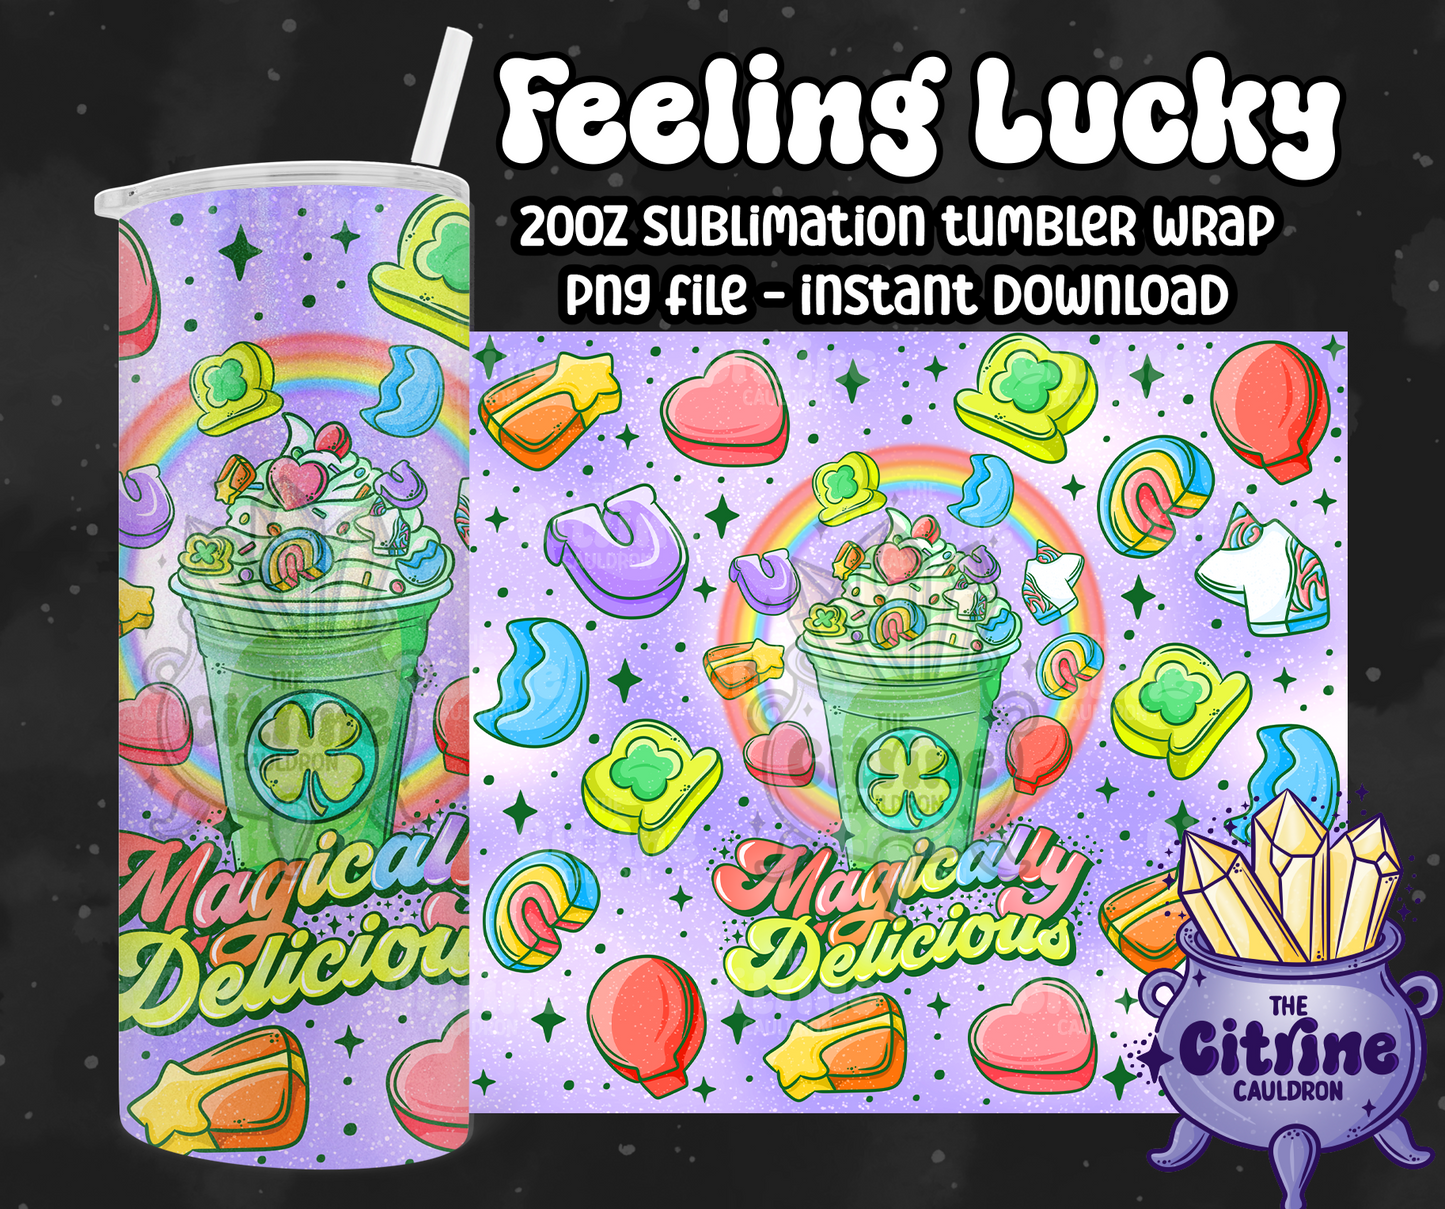 Feeling Lucky - PNG Wrap for Sublimation 20oz Tumbler